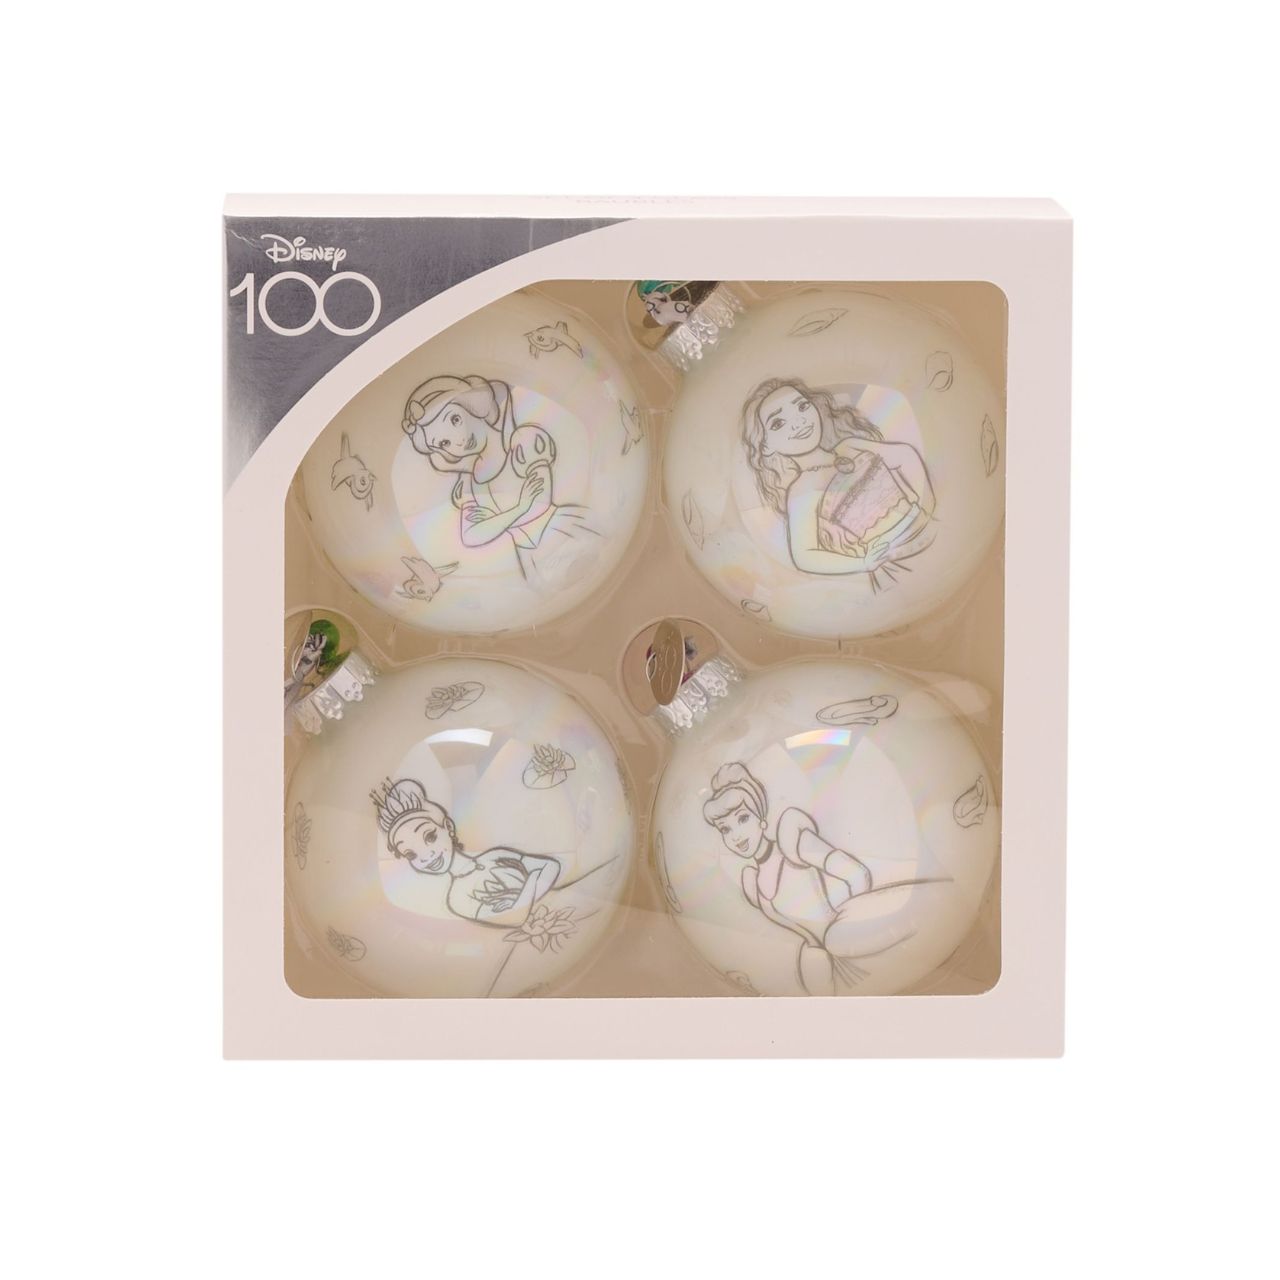 Disney 100th Anniversary Set of 4 Baubles - Princesses  A set of 4 Princess baubles from Disney 100 by DISNEY.  These limited edition tree decorations capture the true magic of Disney on its centenary and can be enjoyed by fans of all ages at Christmas.